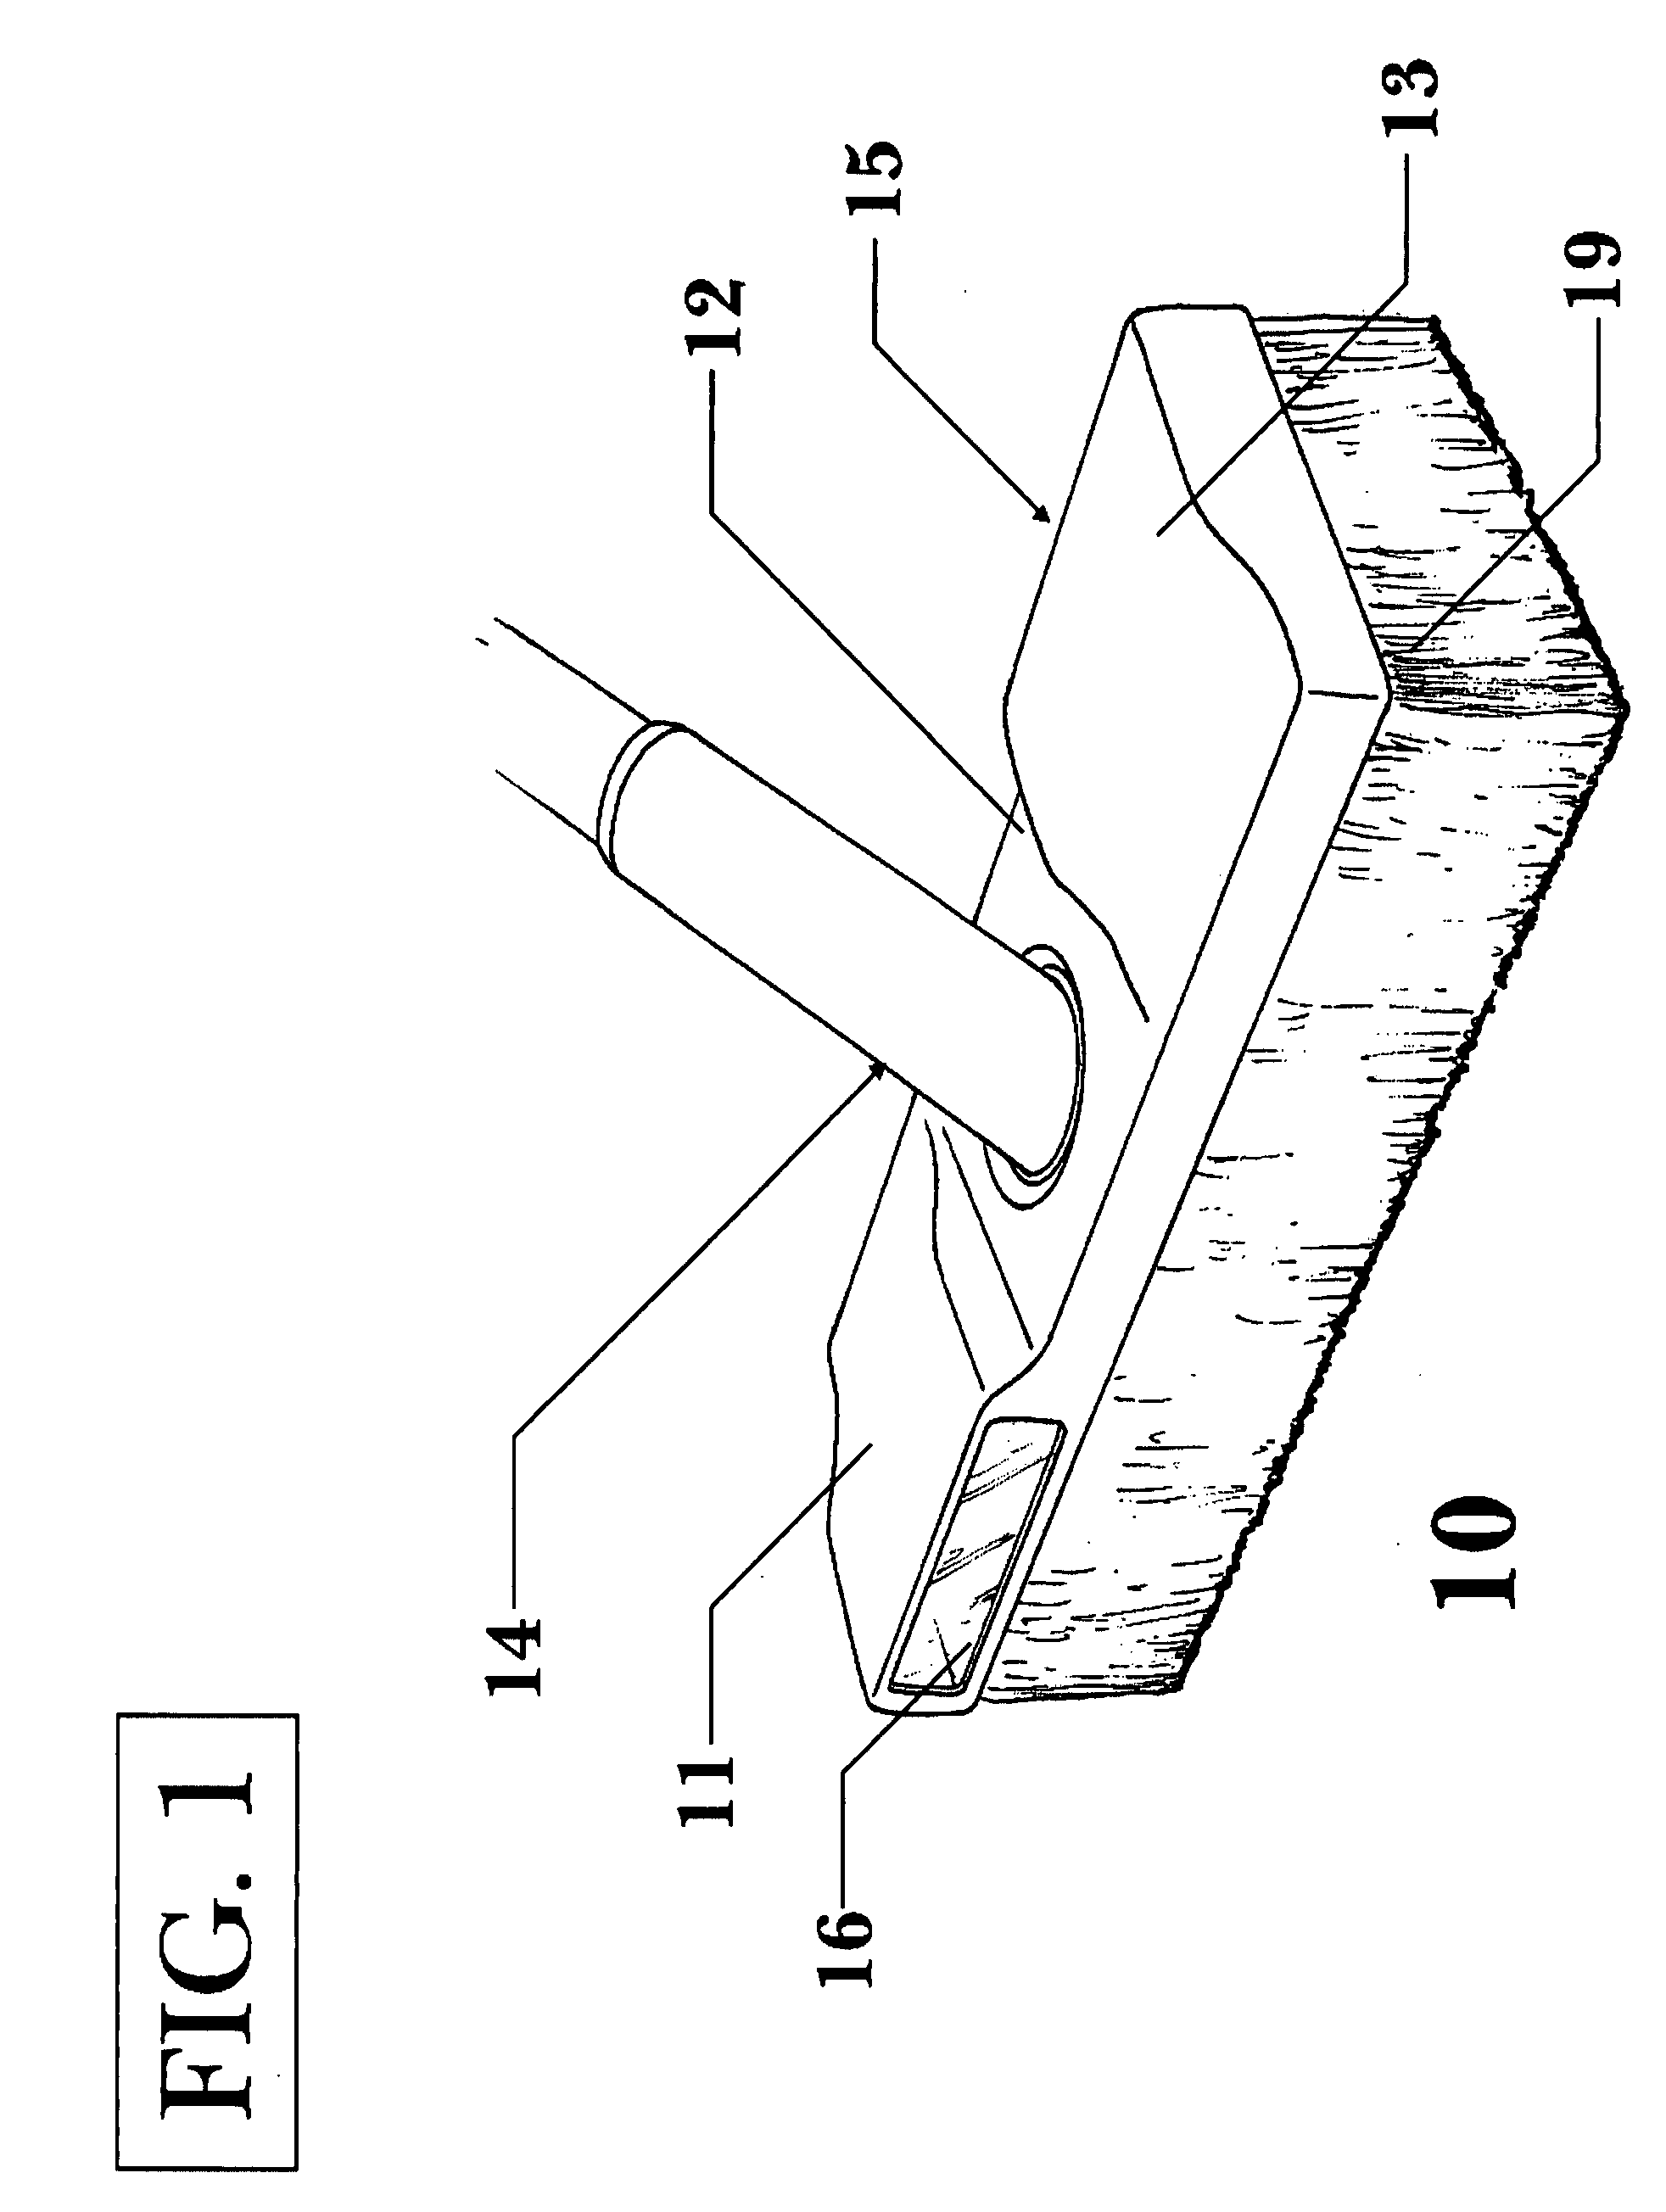 Hand pushed floor cleaning tool with an integrated illumination source